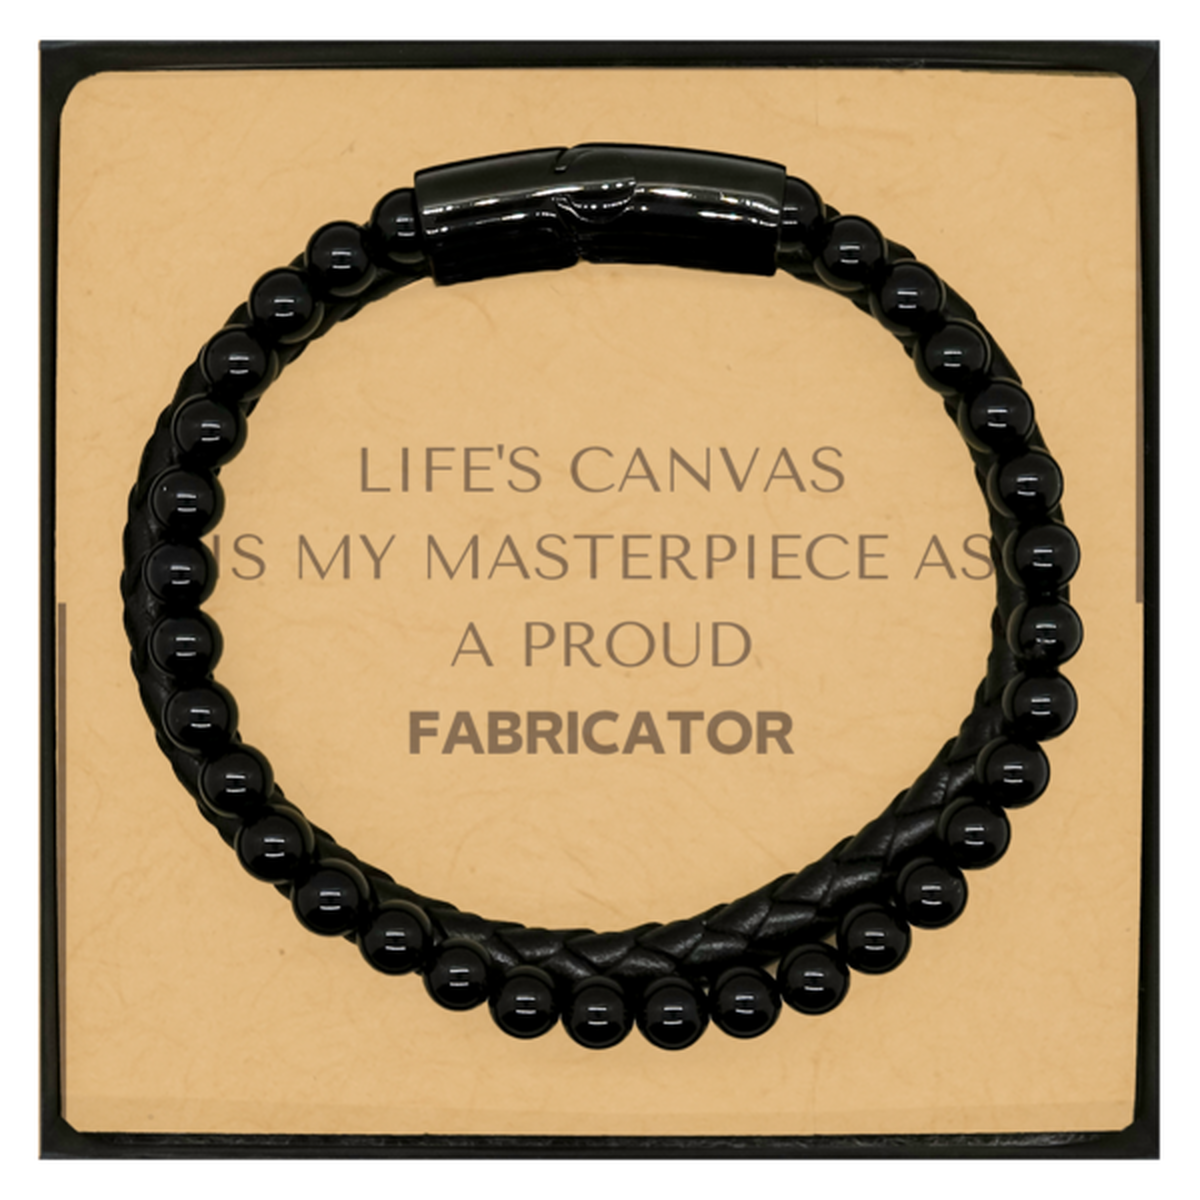 Proud Fabricator Gifts, Life's canvas is my masterpiece, Epic Birthday Christmas Unique Stone Leather Bracelets For Fabricator, Coworkers, Men, Women, Friends